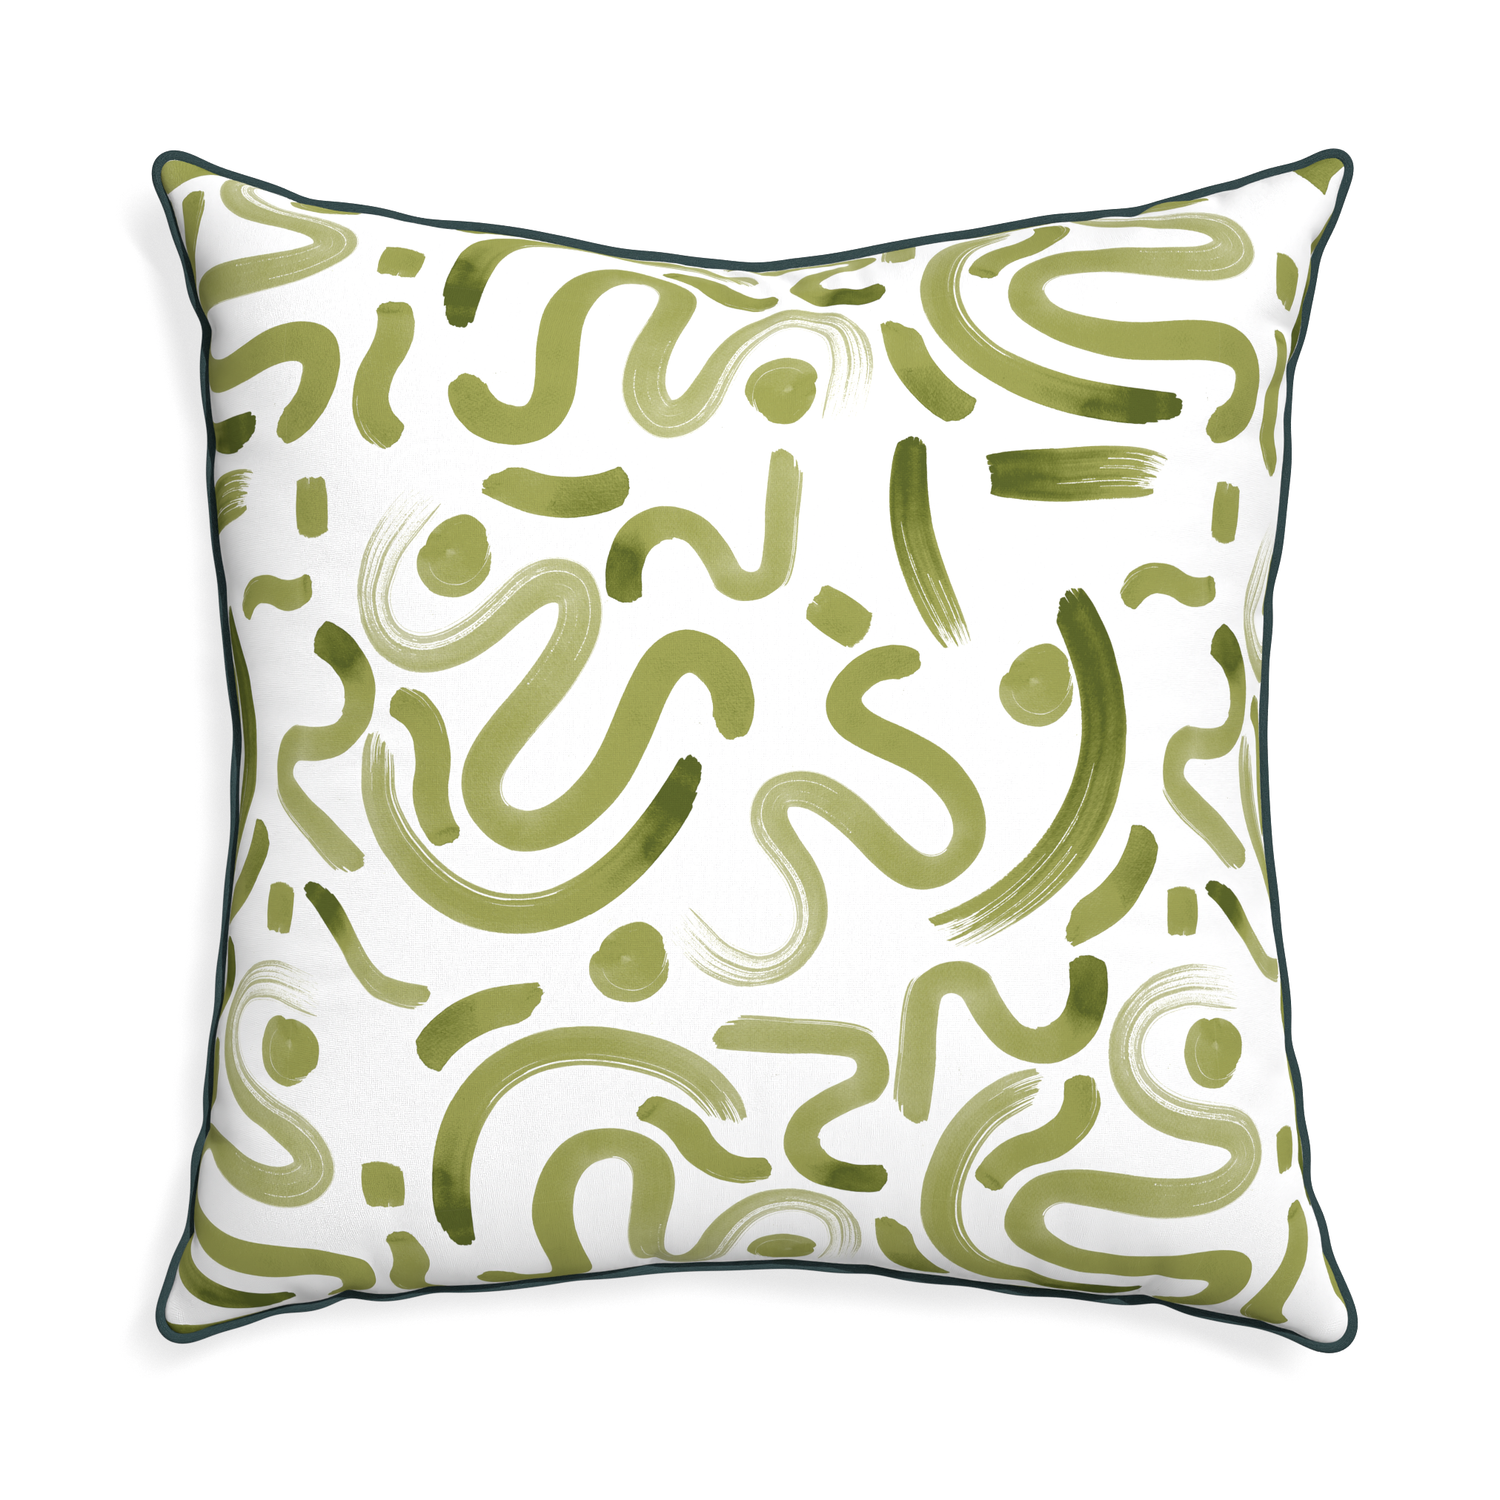 Euro-sham hockney moss custom moss greenpillow with p piping on white background